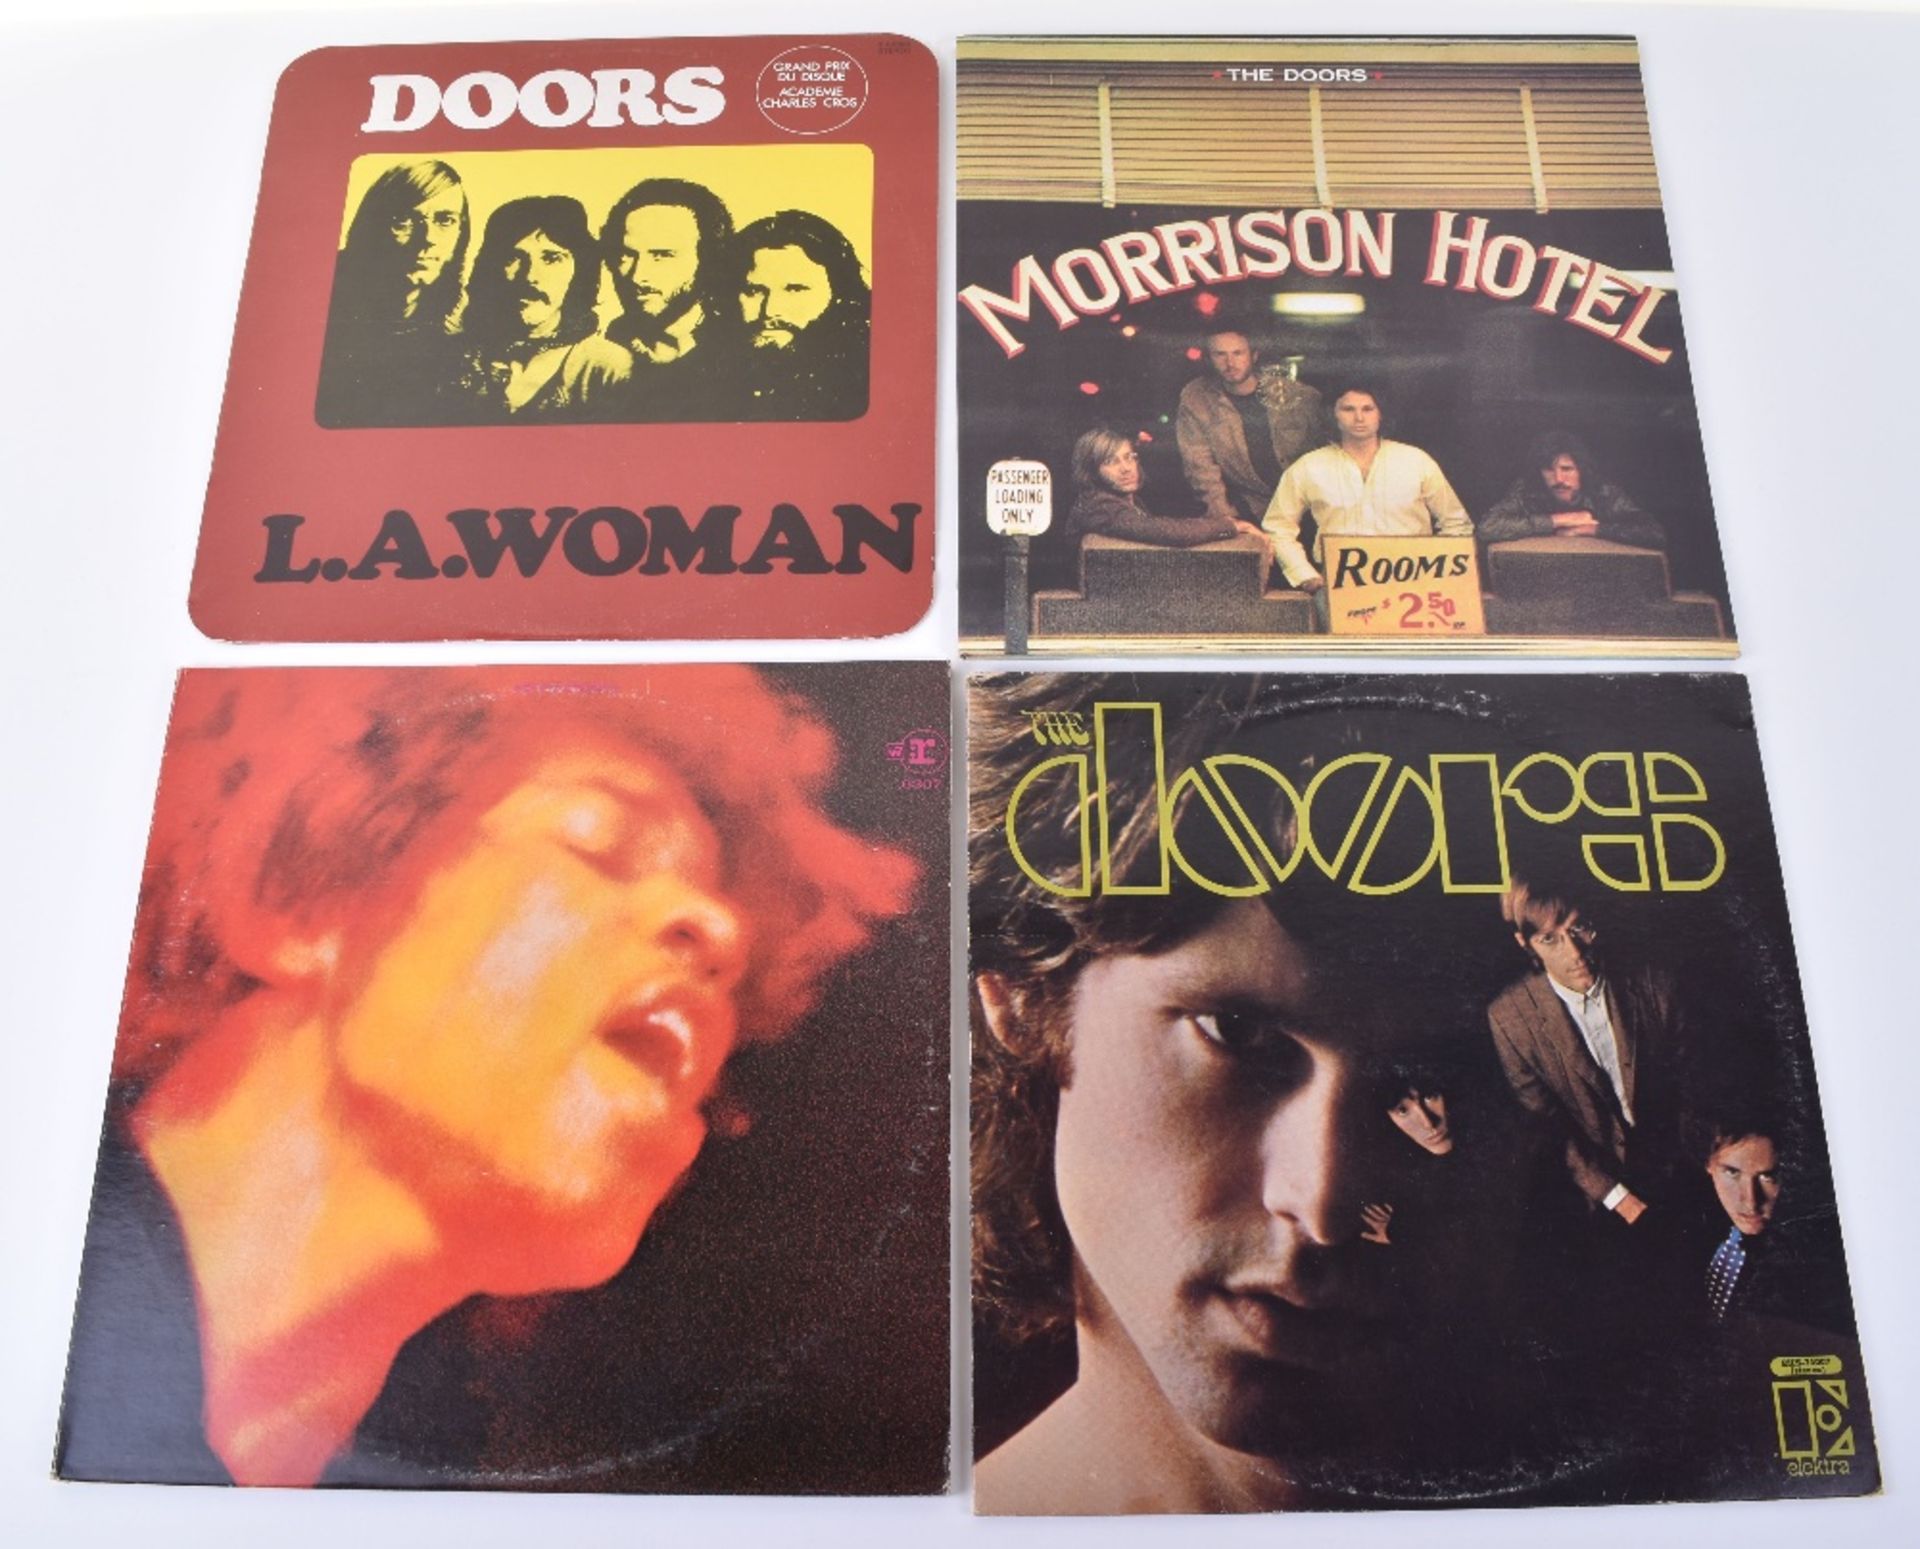 Jimmy Hendrix and The Doors LP’s